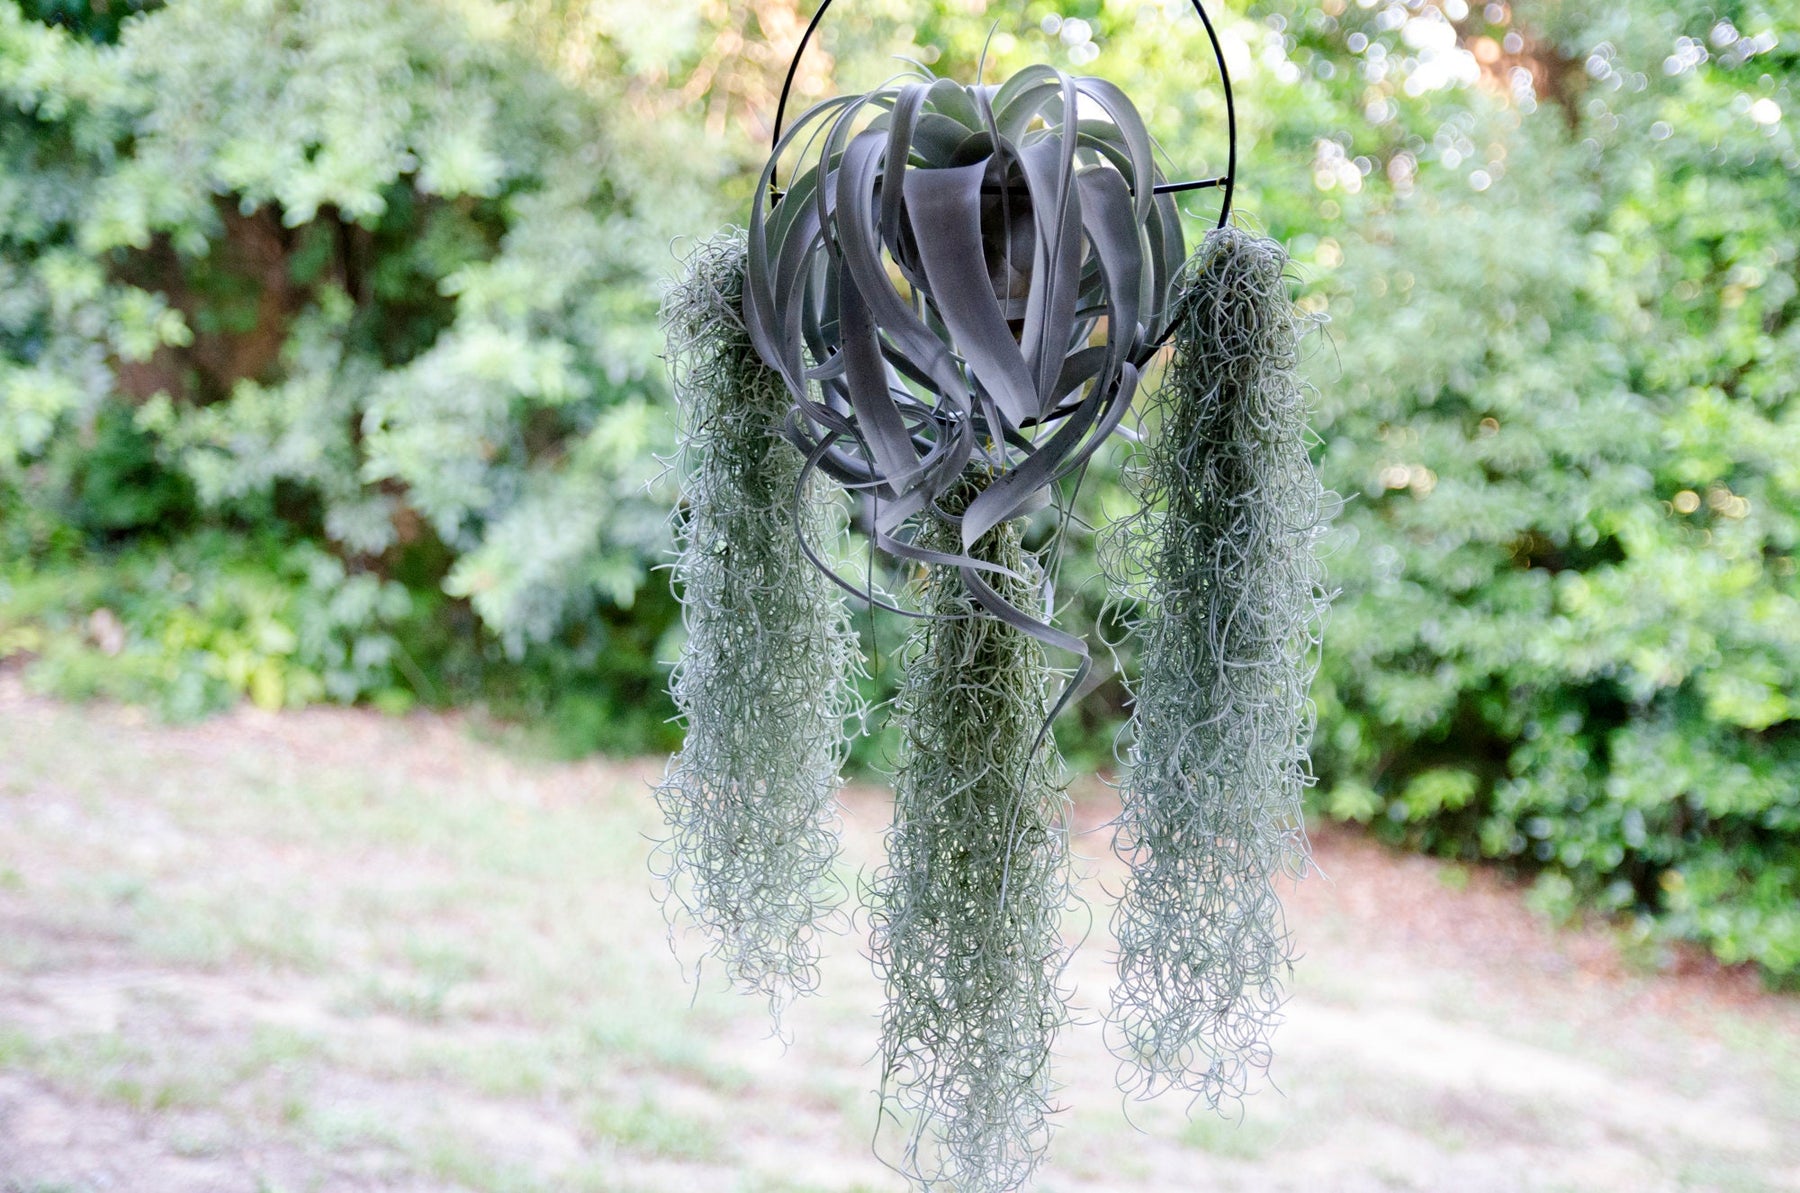 Spanish Moss  Air Plants for Sale